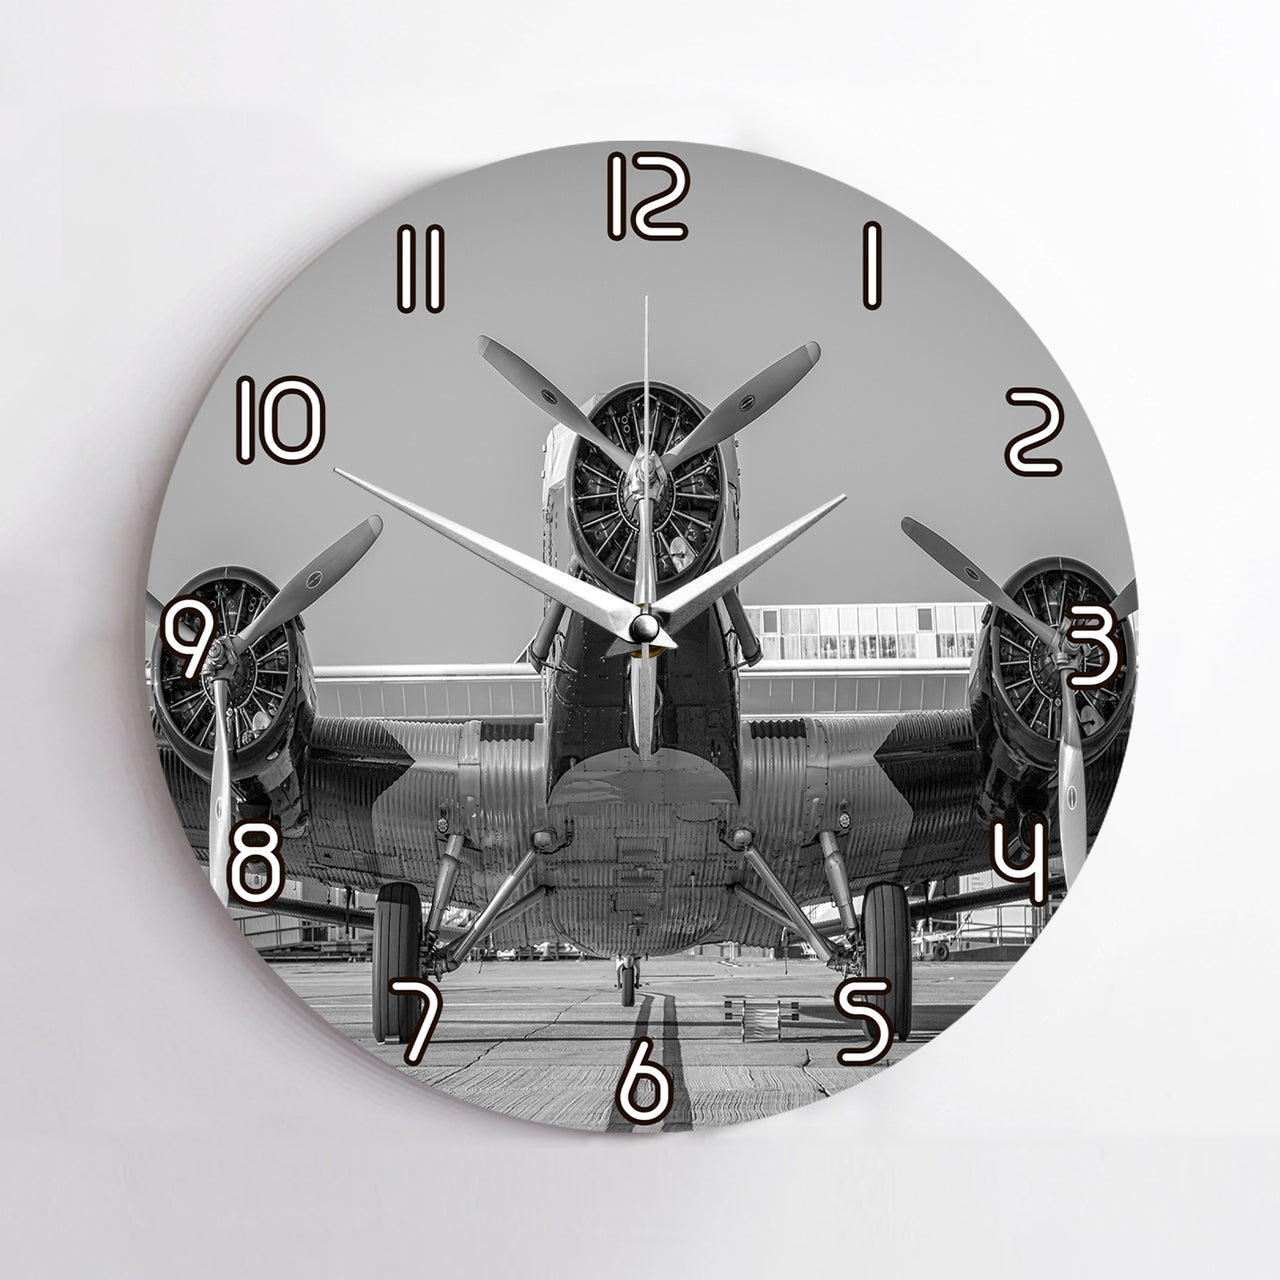 Face to Face to 3 Engine Old Airplane Printed Wall Clocks